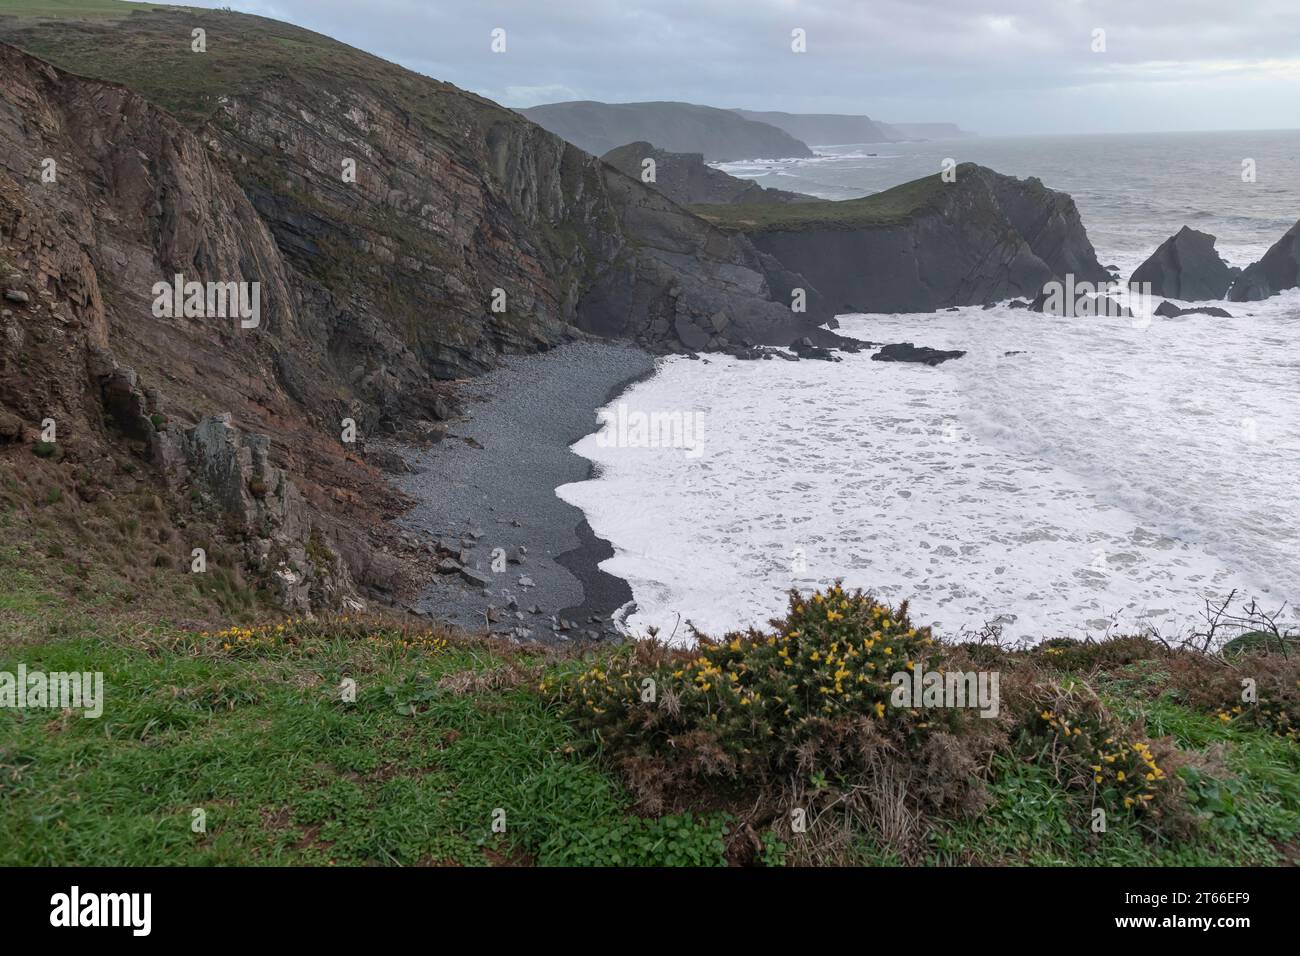 Looking dowm on a grey shale beach on a craggy winter seascape Stock Photo